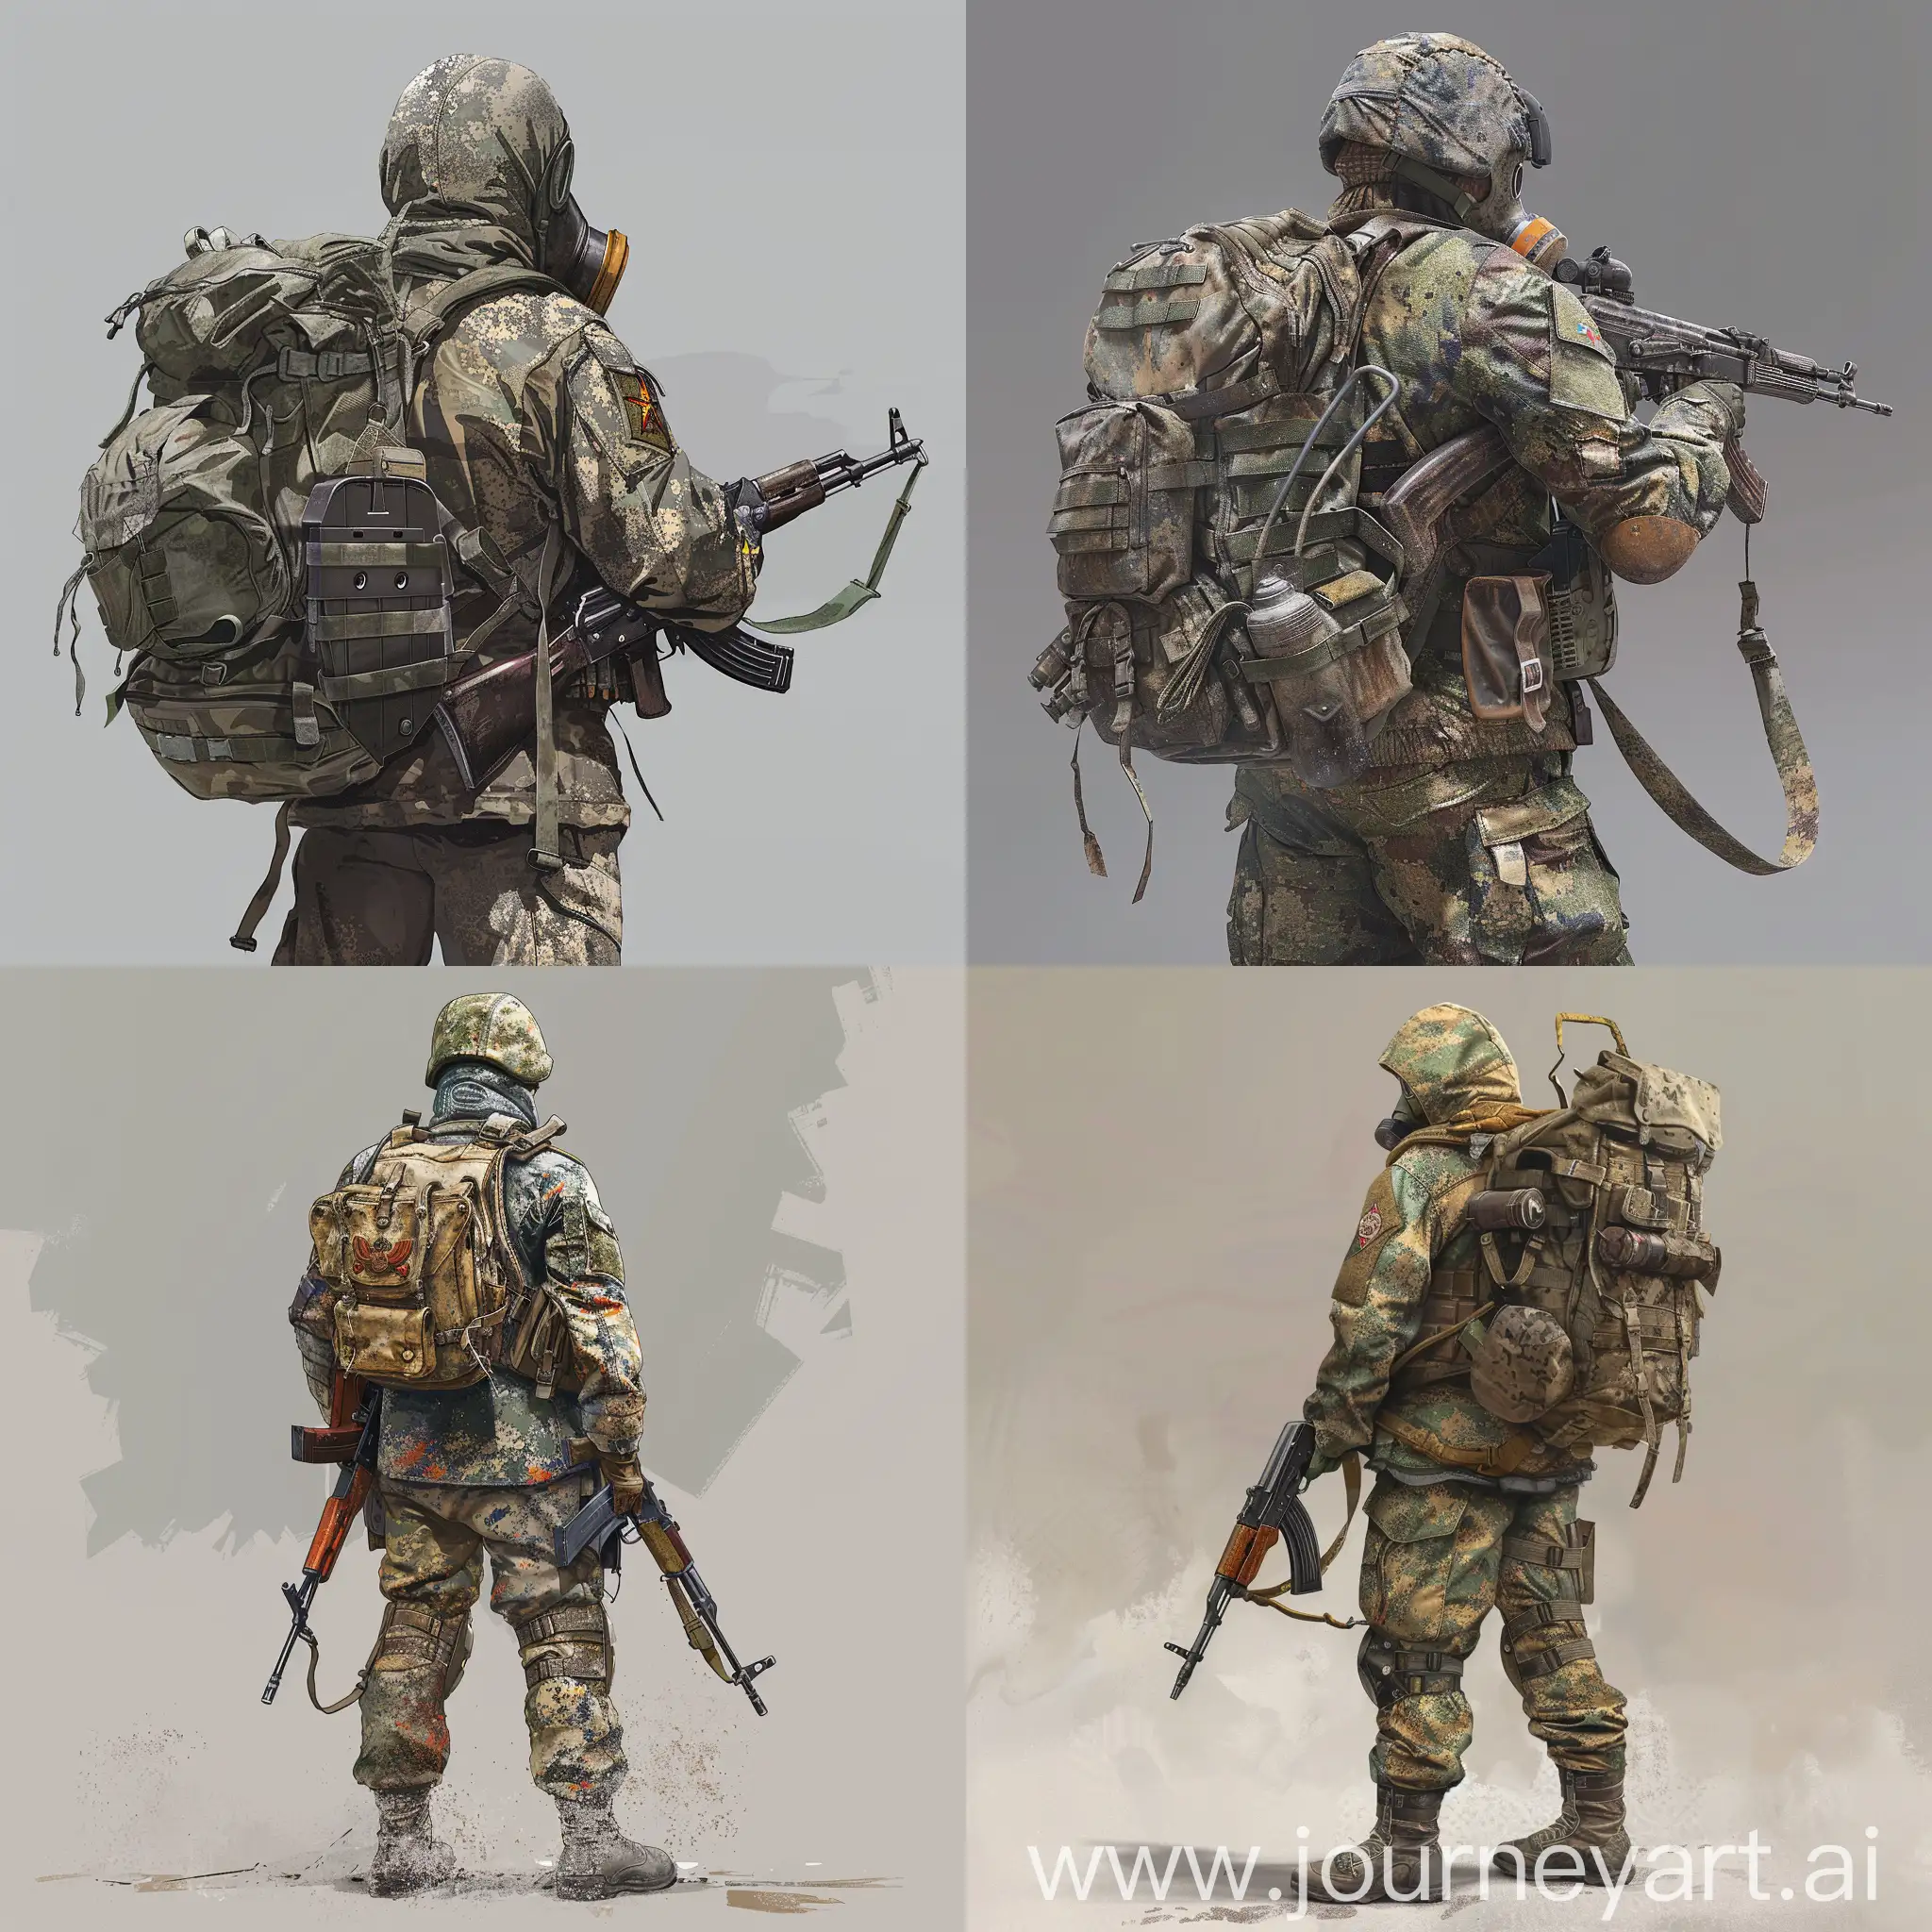 Character concept art, Spetsnaz, Dragunov SVD rifle in the arms, soviet camouflage military uniform, gasmask, old soviet armor, military backpack on the back.